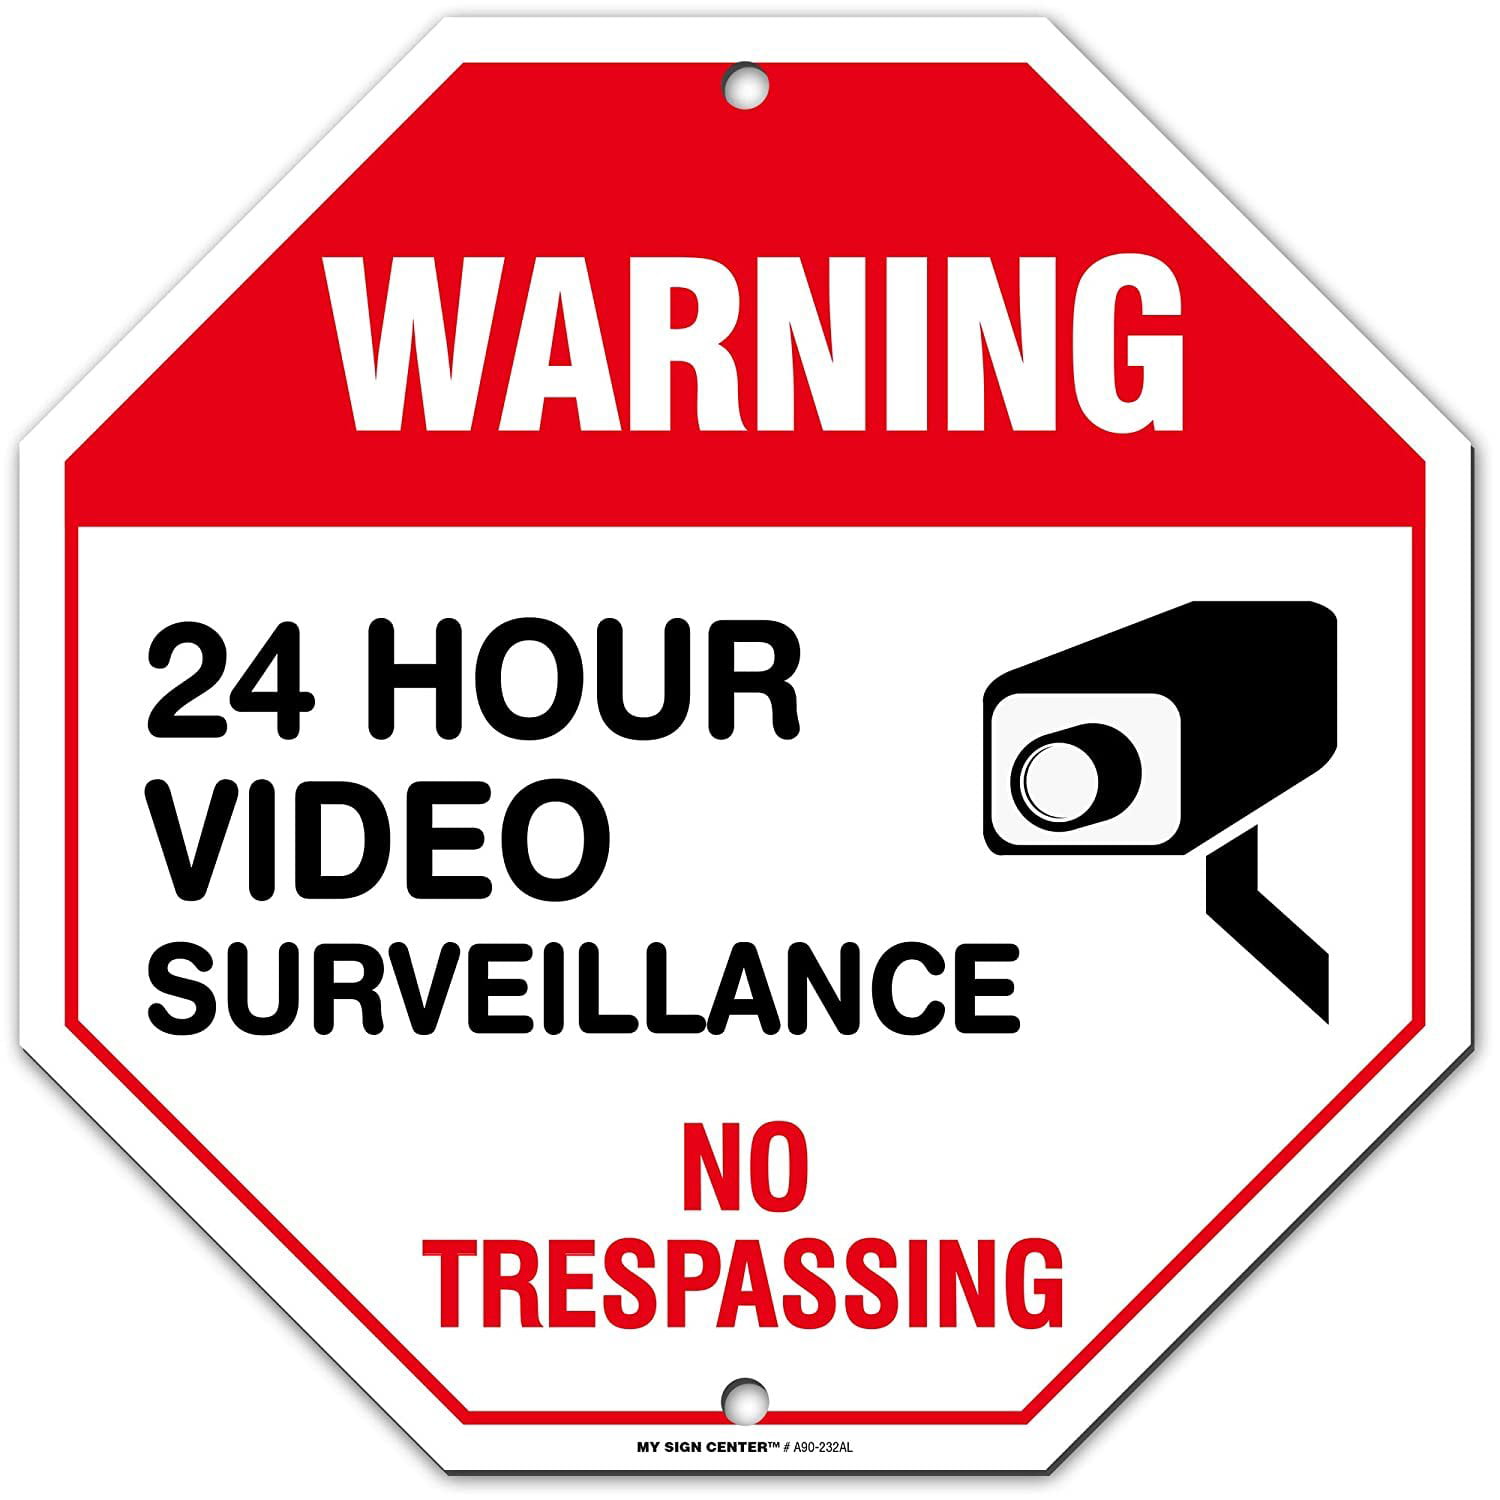 12" x 18" .040 THICK ALUM SIGN FREE SHIPPING 24 HOUR VIDEO SURVEILLANCE 